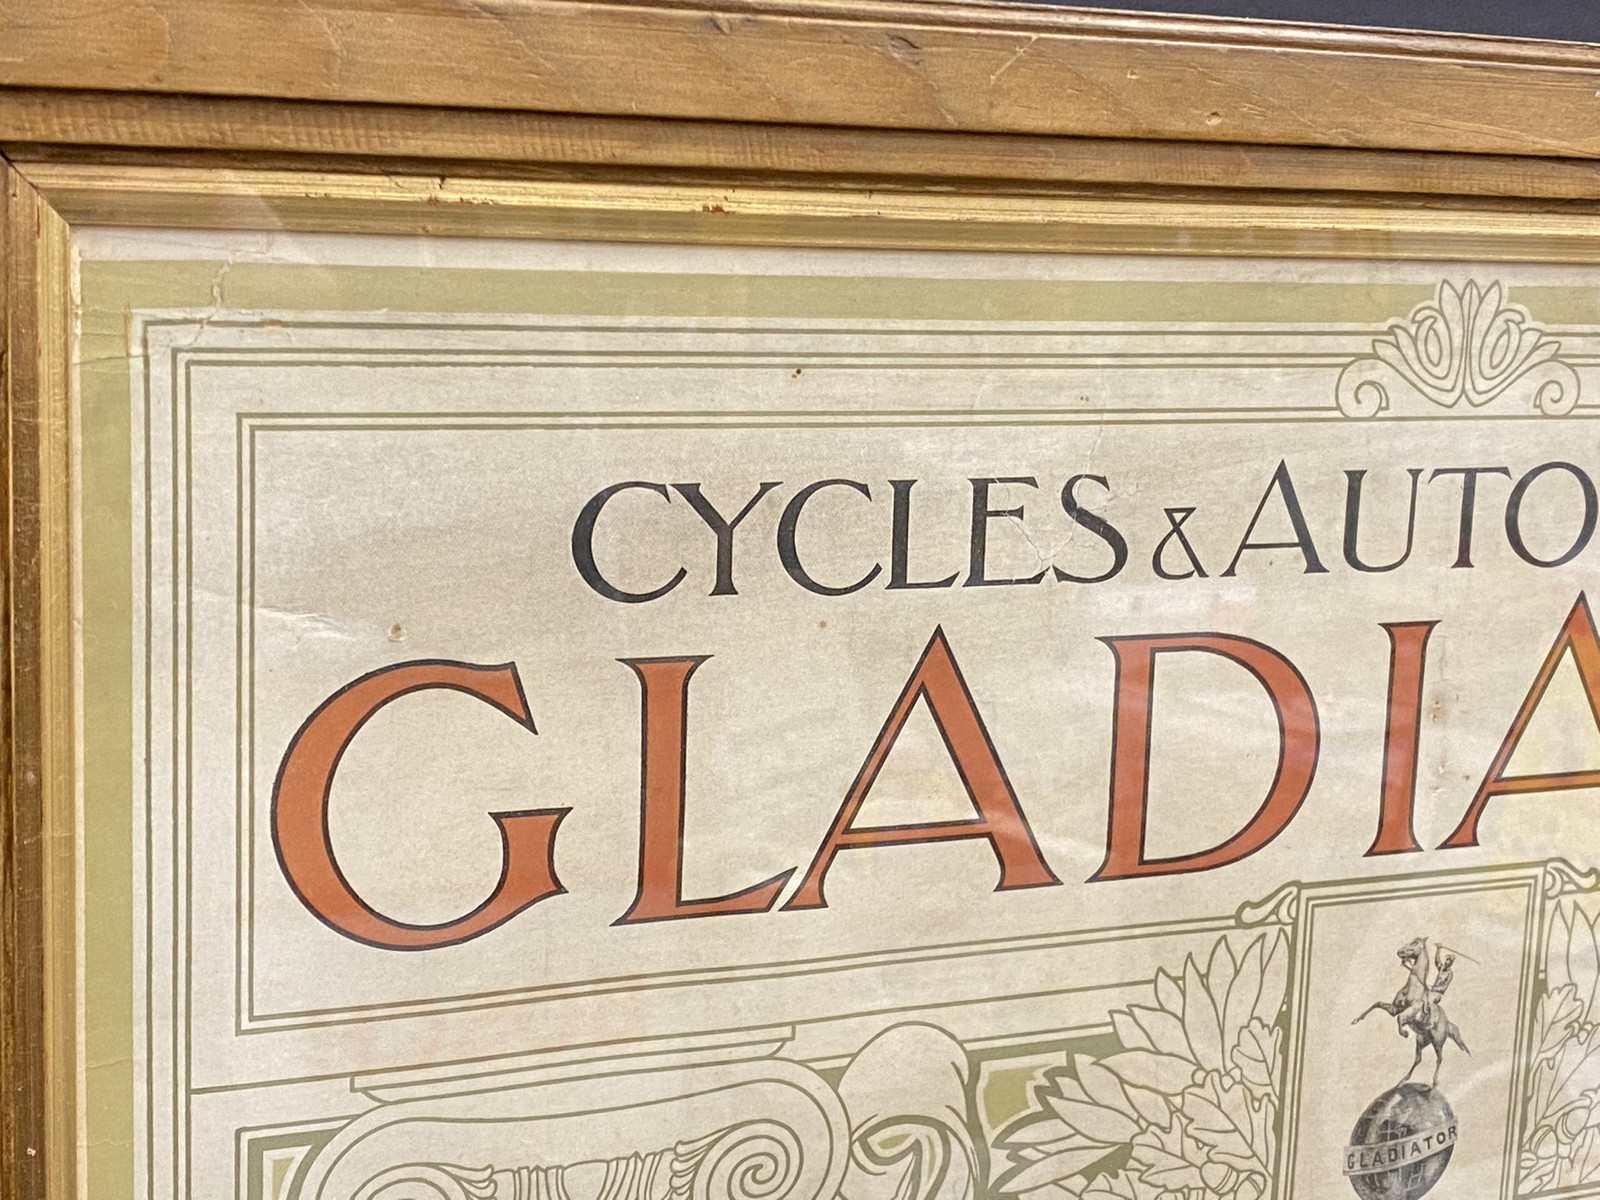 A superb framed and glazed early 20th Century pictorial advertisement for Gladiator cycles and - Image 4 of 6